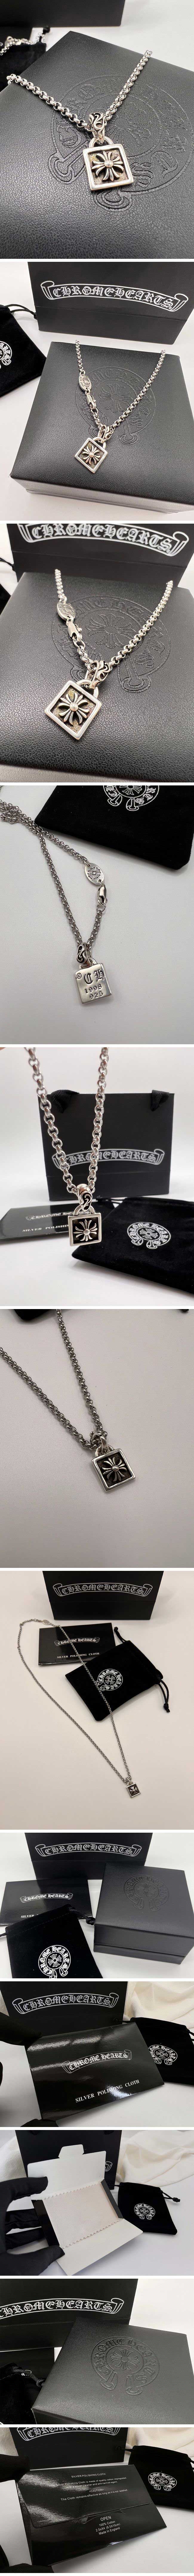 Chrome Hearts SV925 Framed CH Cross Roll Chain Necklace クロムハーツ フレームド CHクロス ネックレス